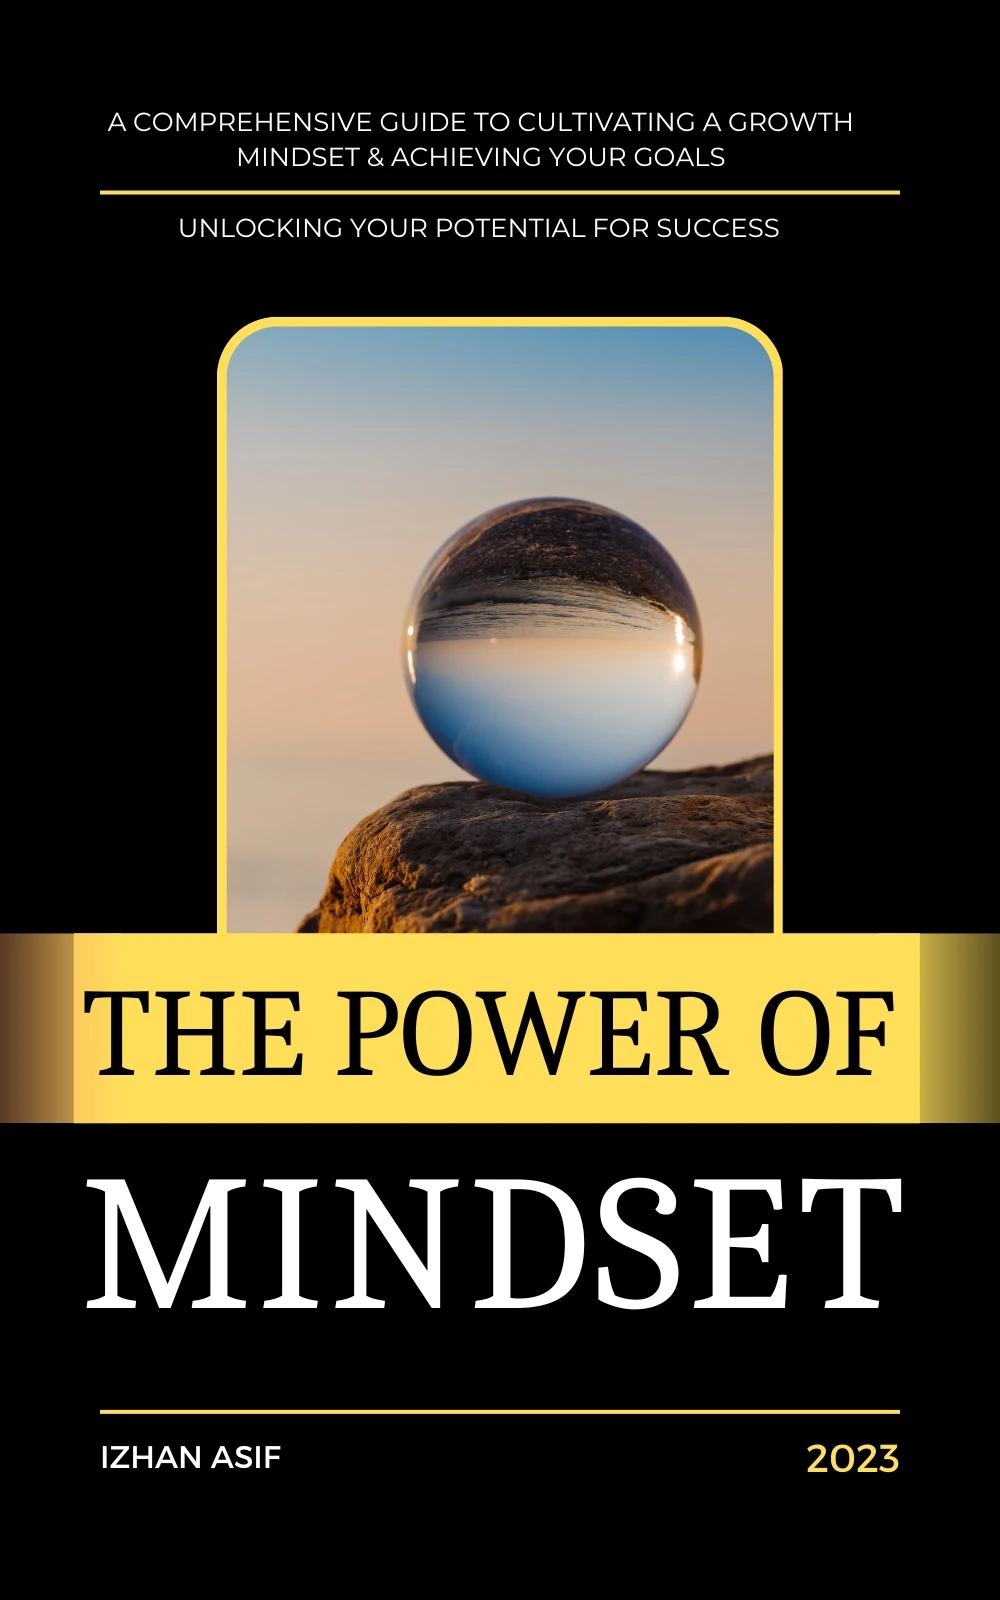 The Power of Mindset: Unlocking Your Potential for Success